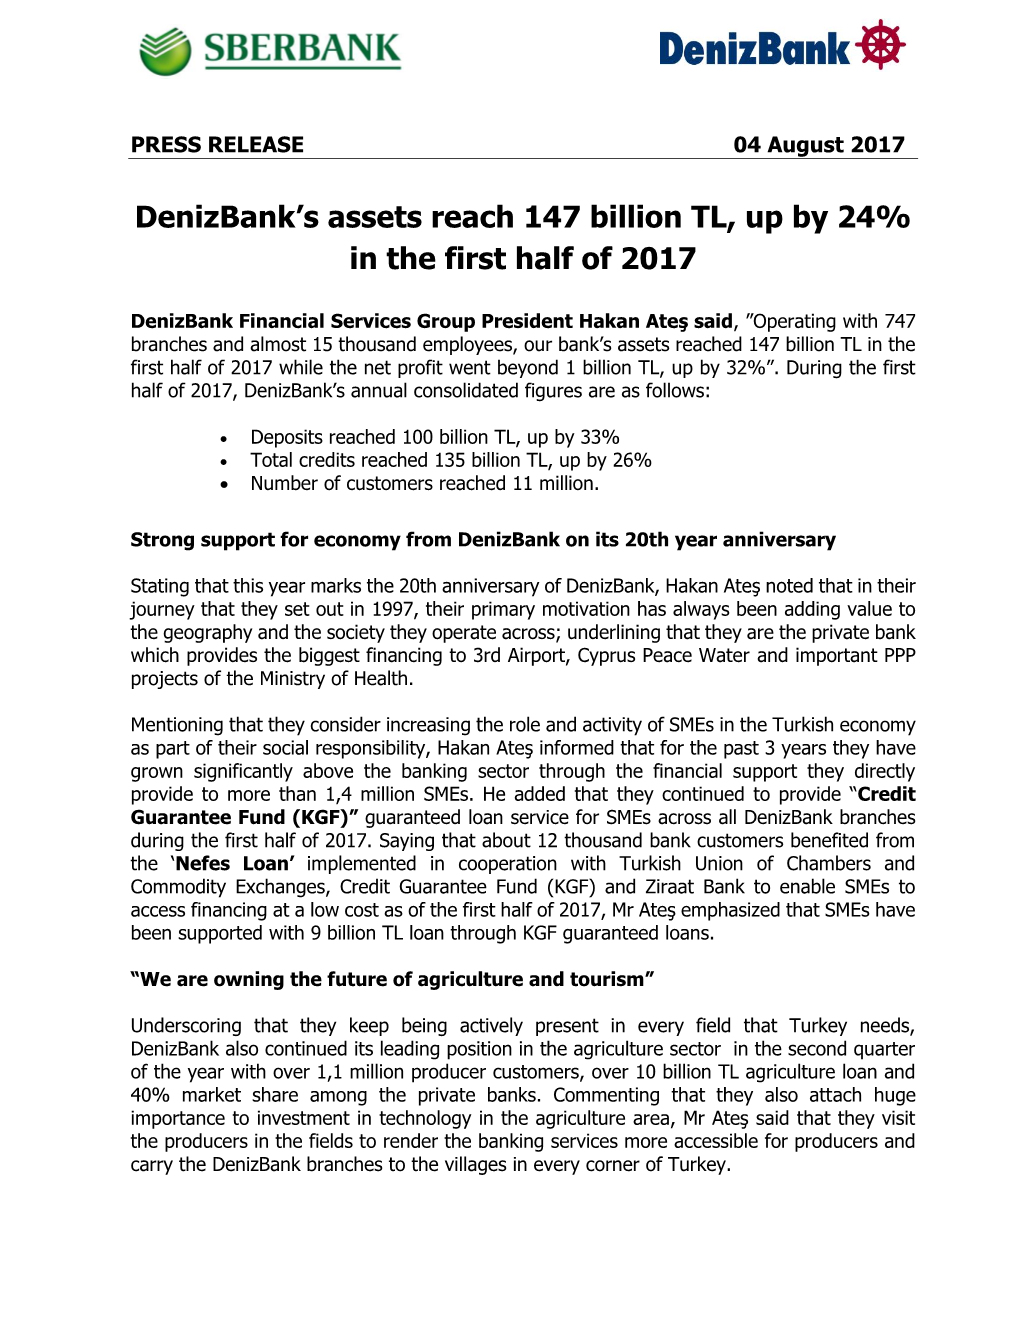 Denizbank's Assets Reach 147 Billion TL, up by 24% in the First Half of 2017